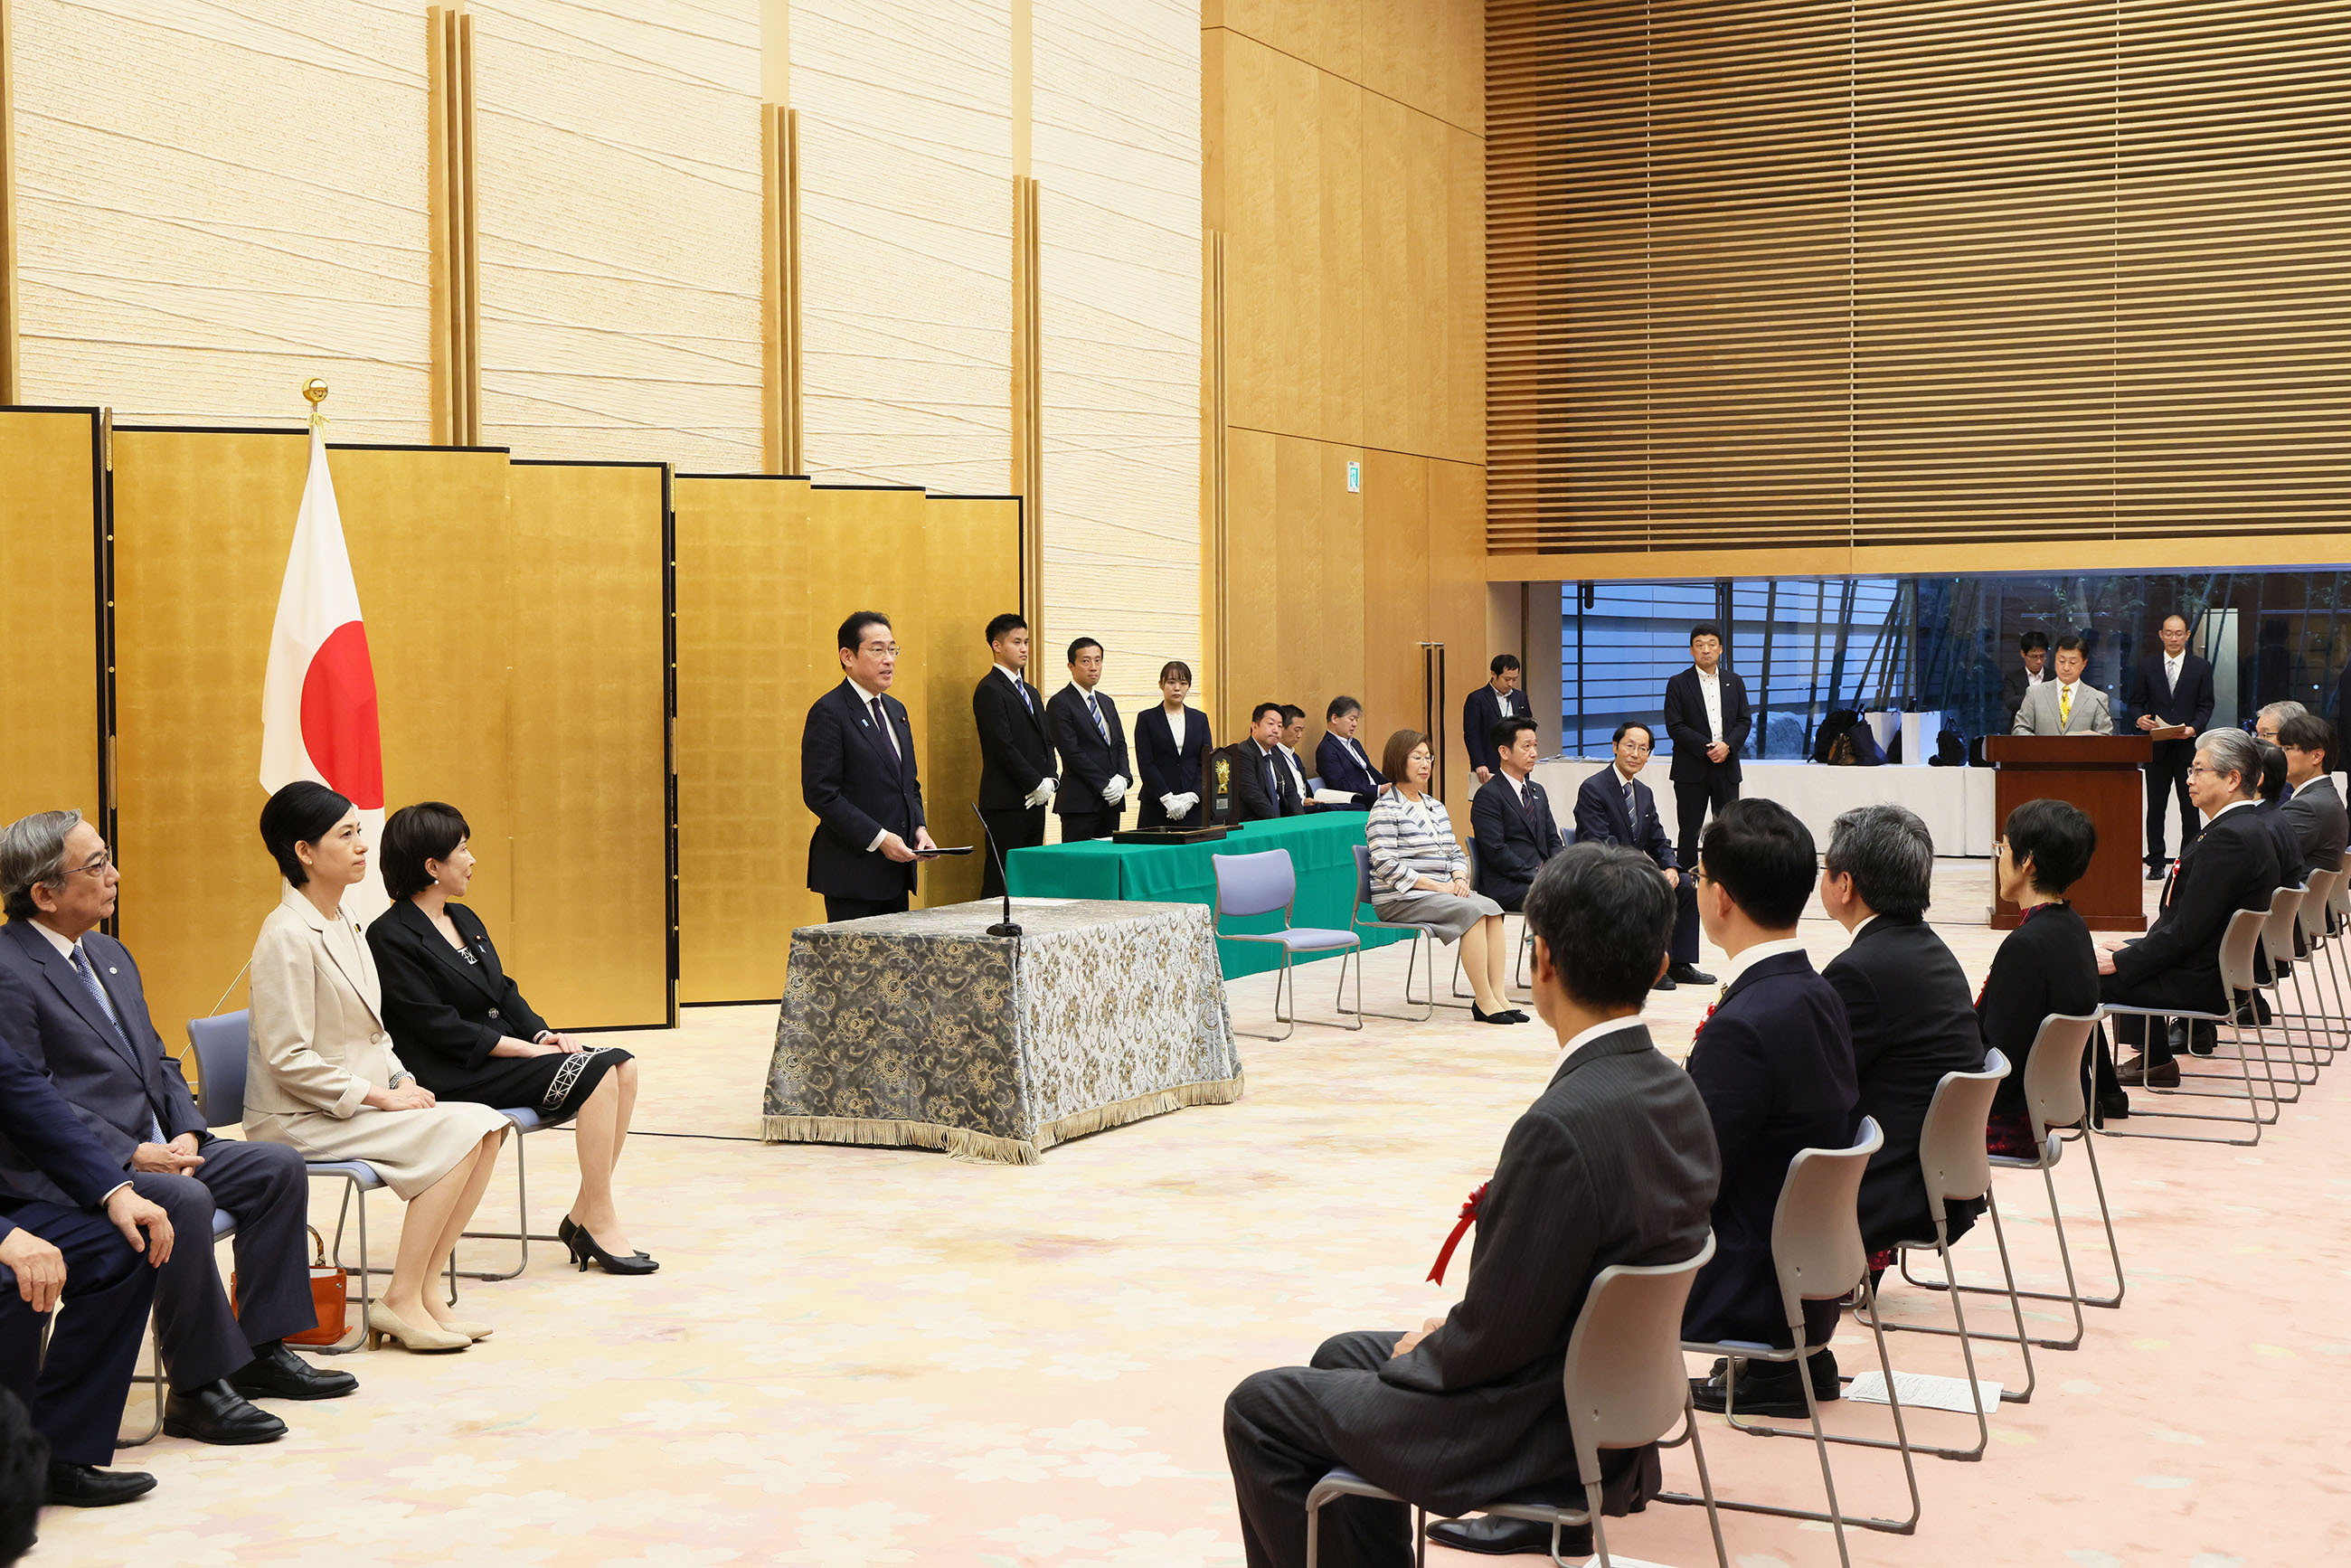 Award Ceremony for the Japan Medical Research and Development Grand Prize